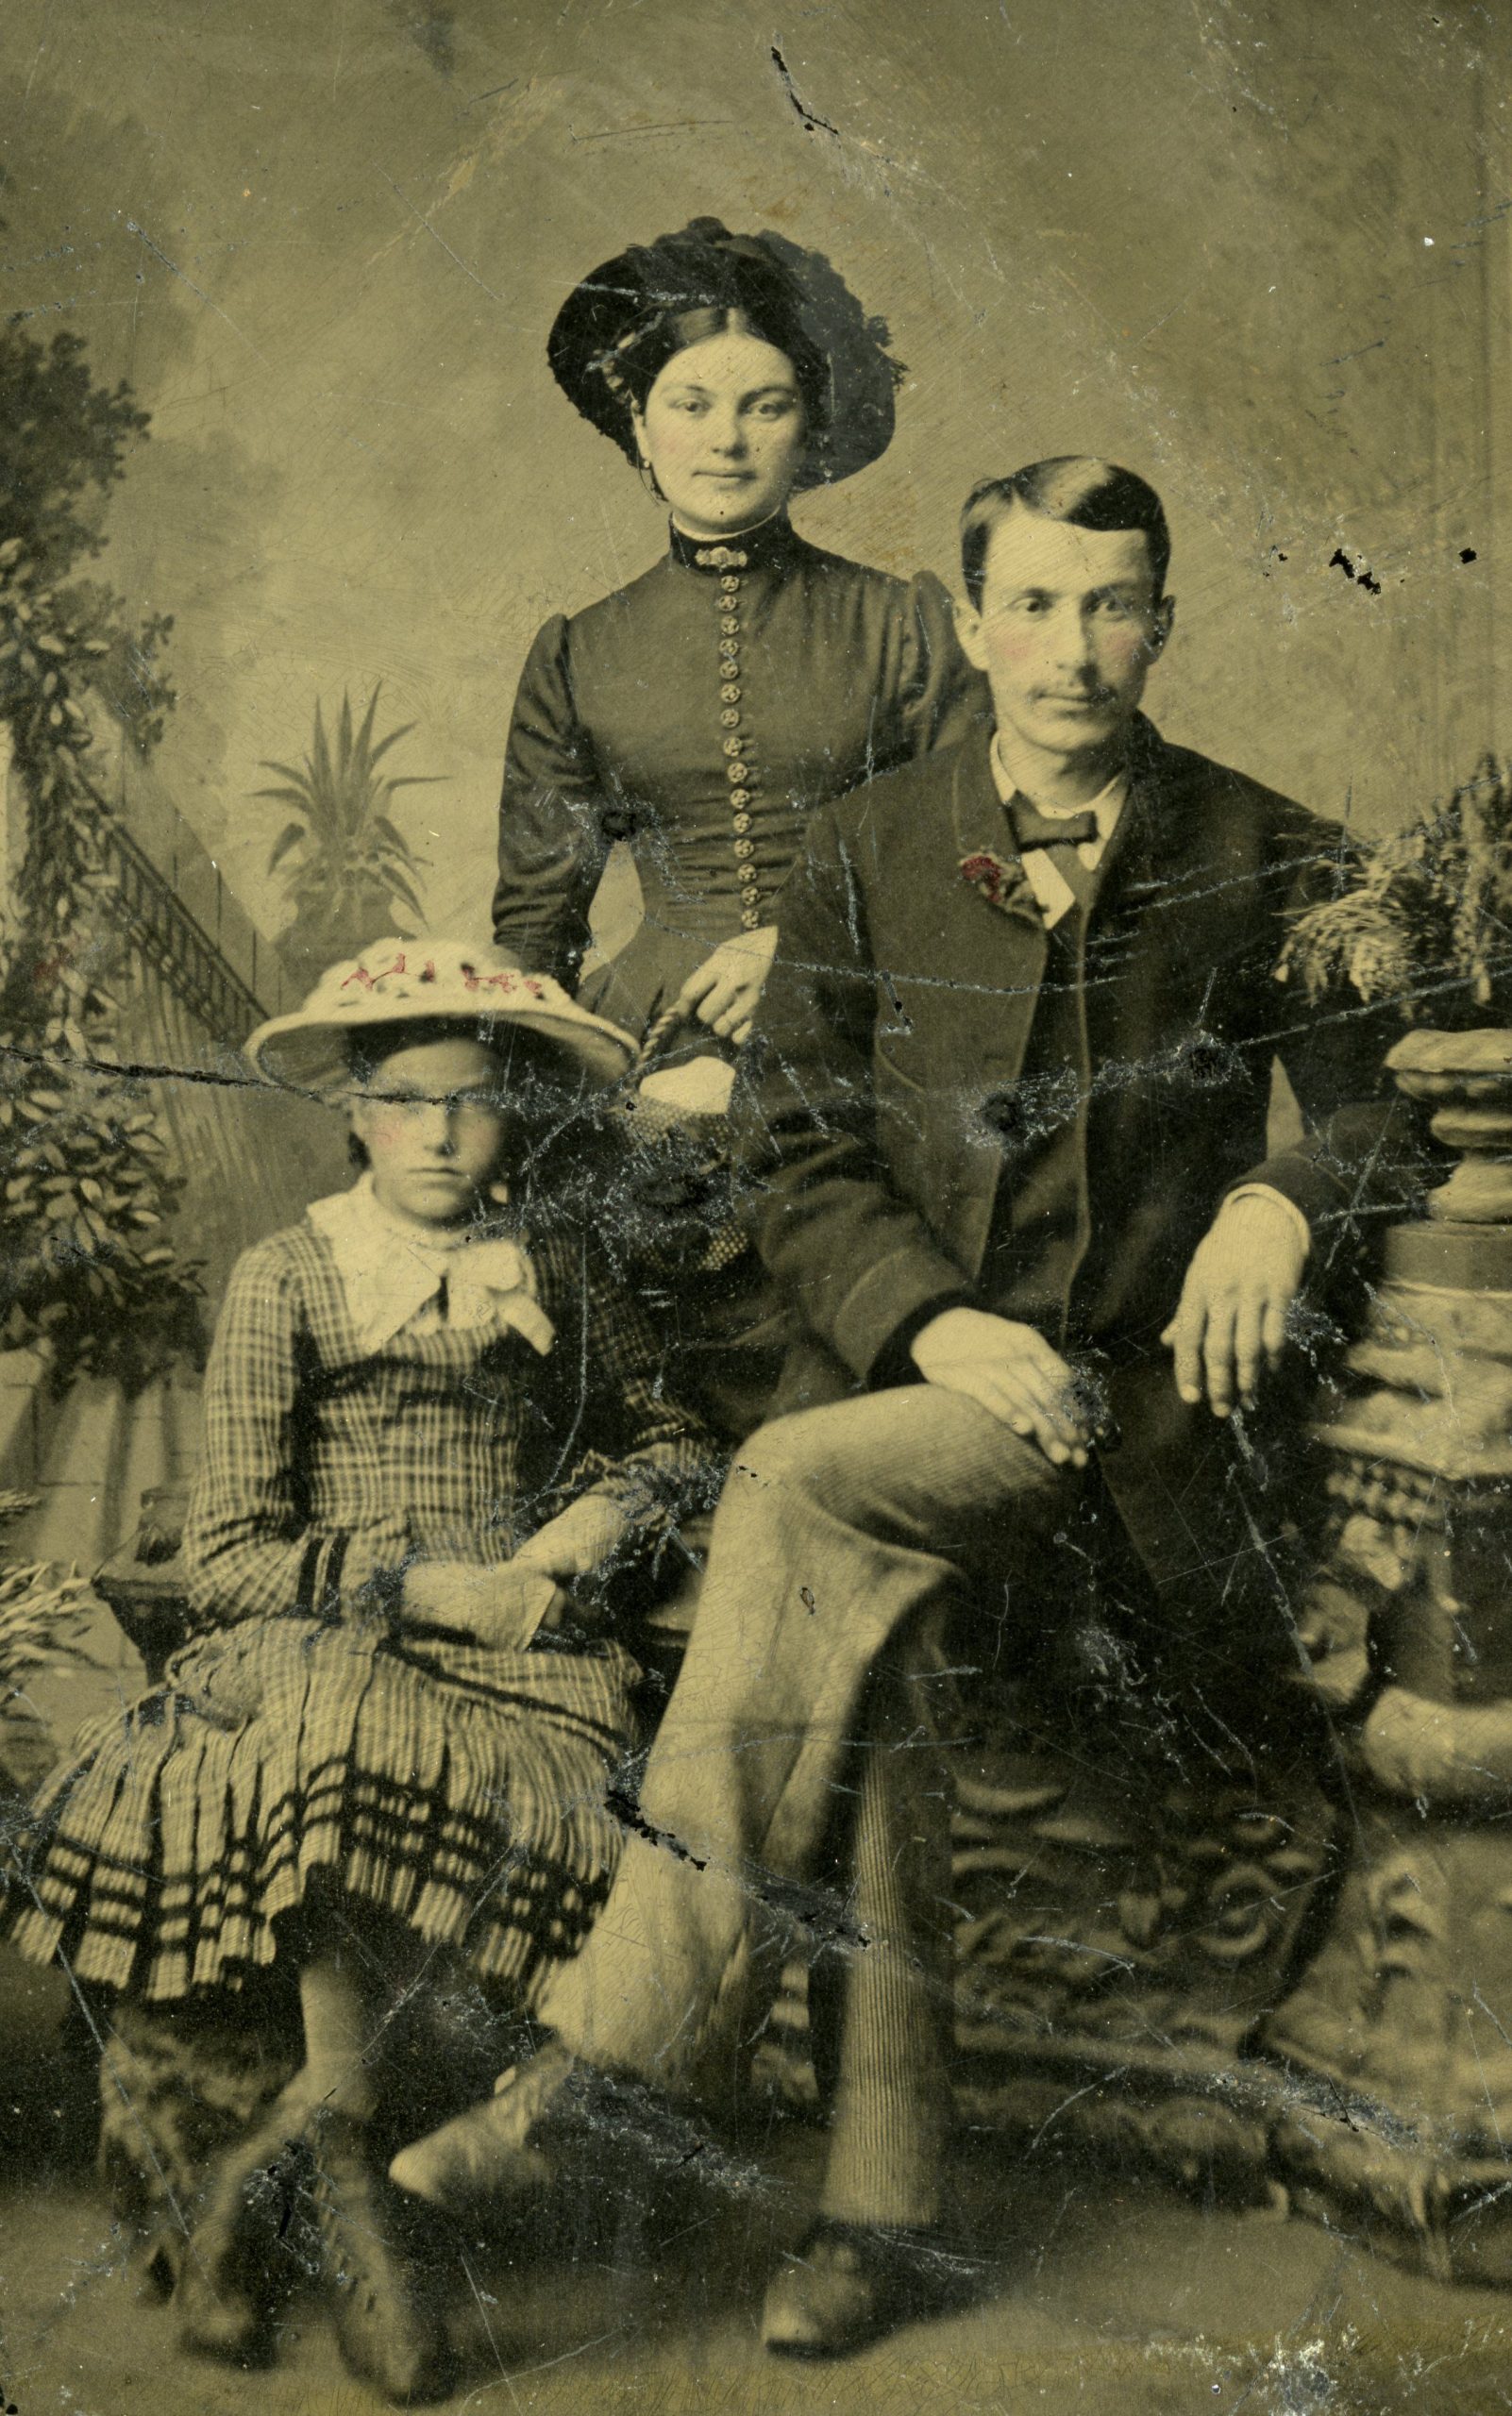 Historic image taken in a portrait studio of Joseph Hodskinson, his wife Margaret and young daughter Celina.